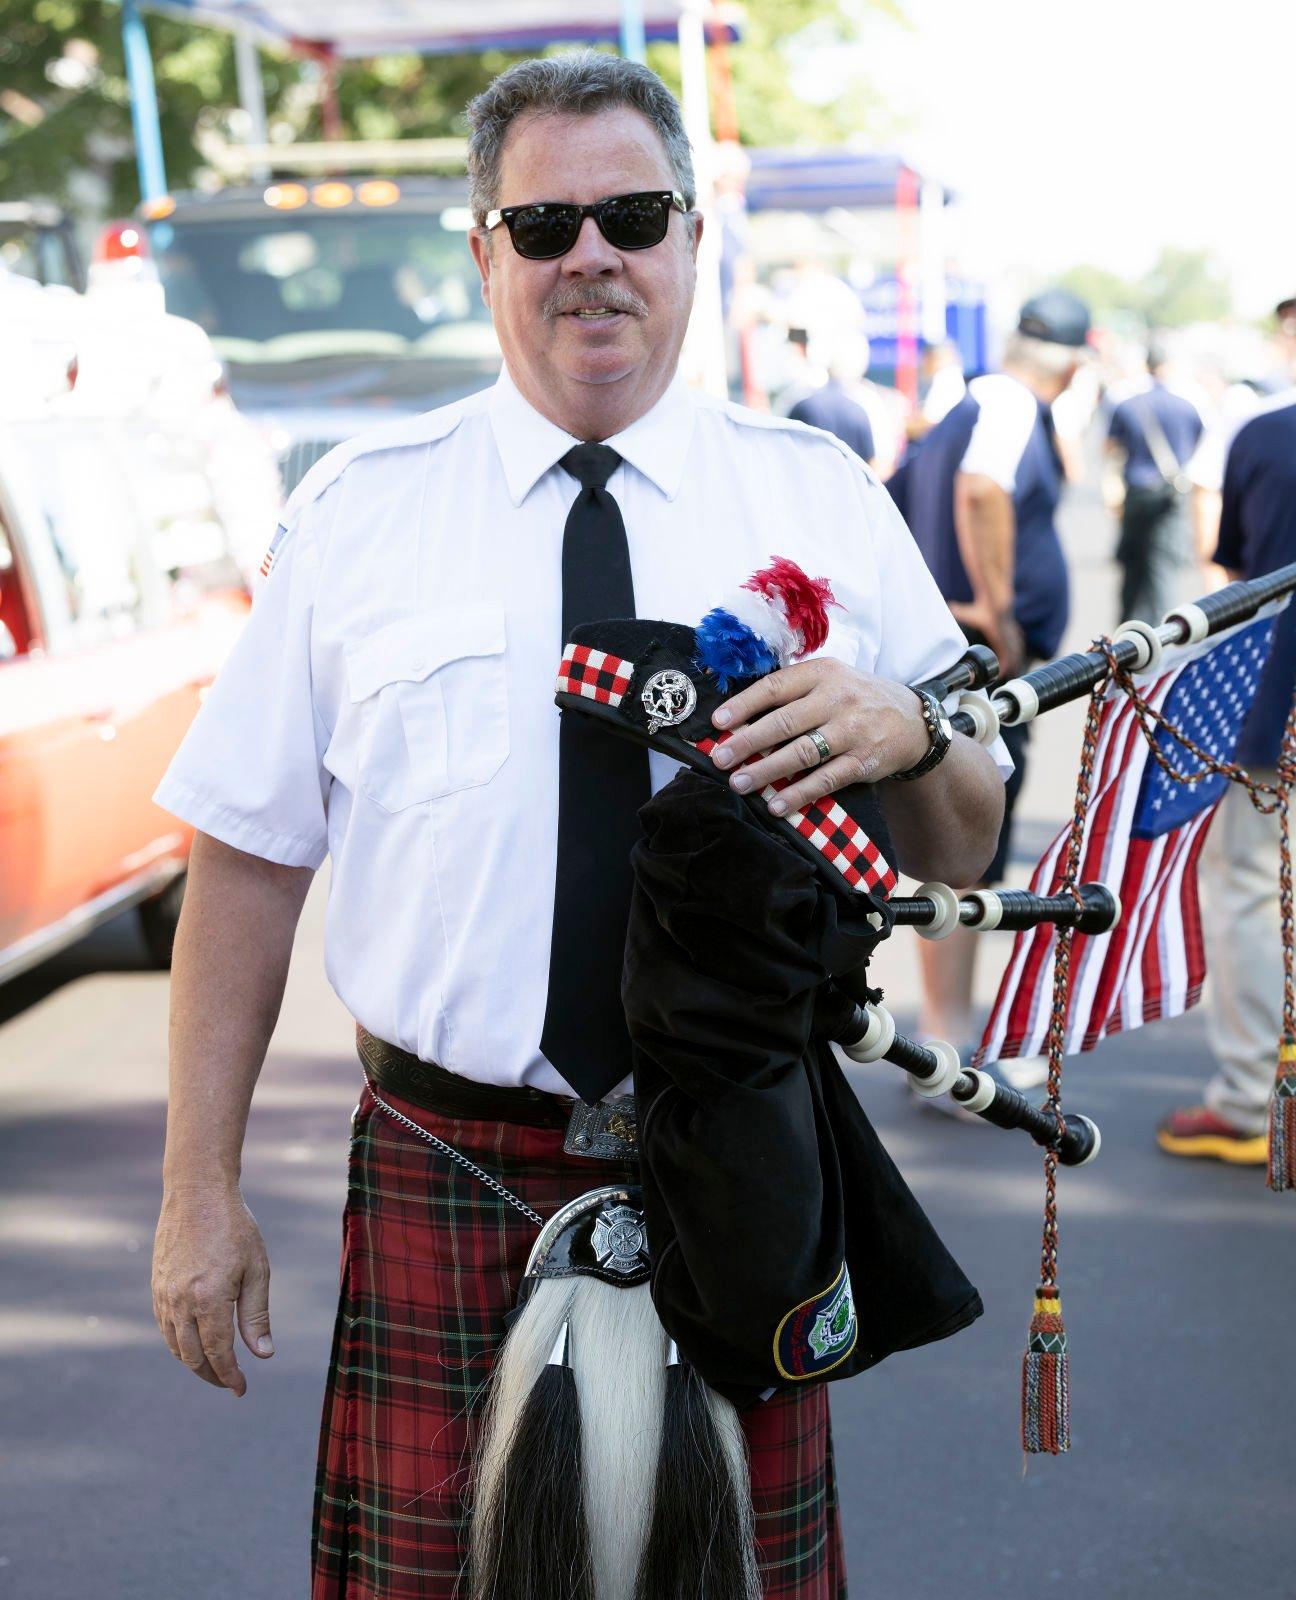 Bill Spivey plays with Dubuque Fire Pipes & Drums as they march in the parade during Heritage Days in Bellevue, Iowa.    PHOTO CREDIT: Stephen Gassman